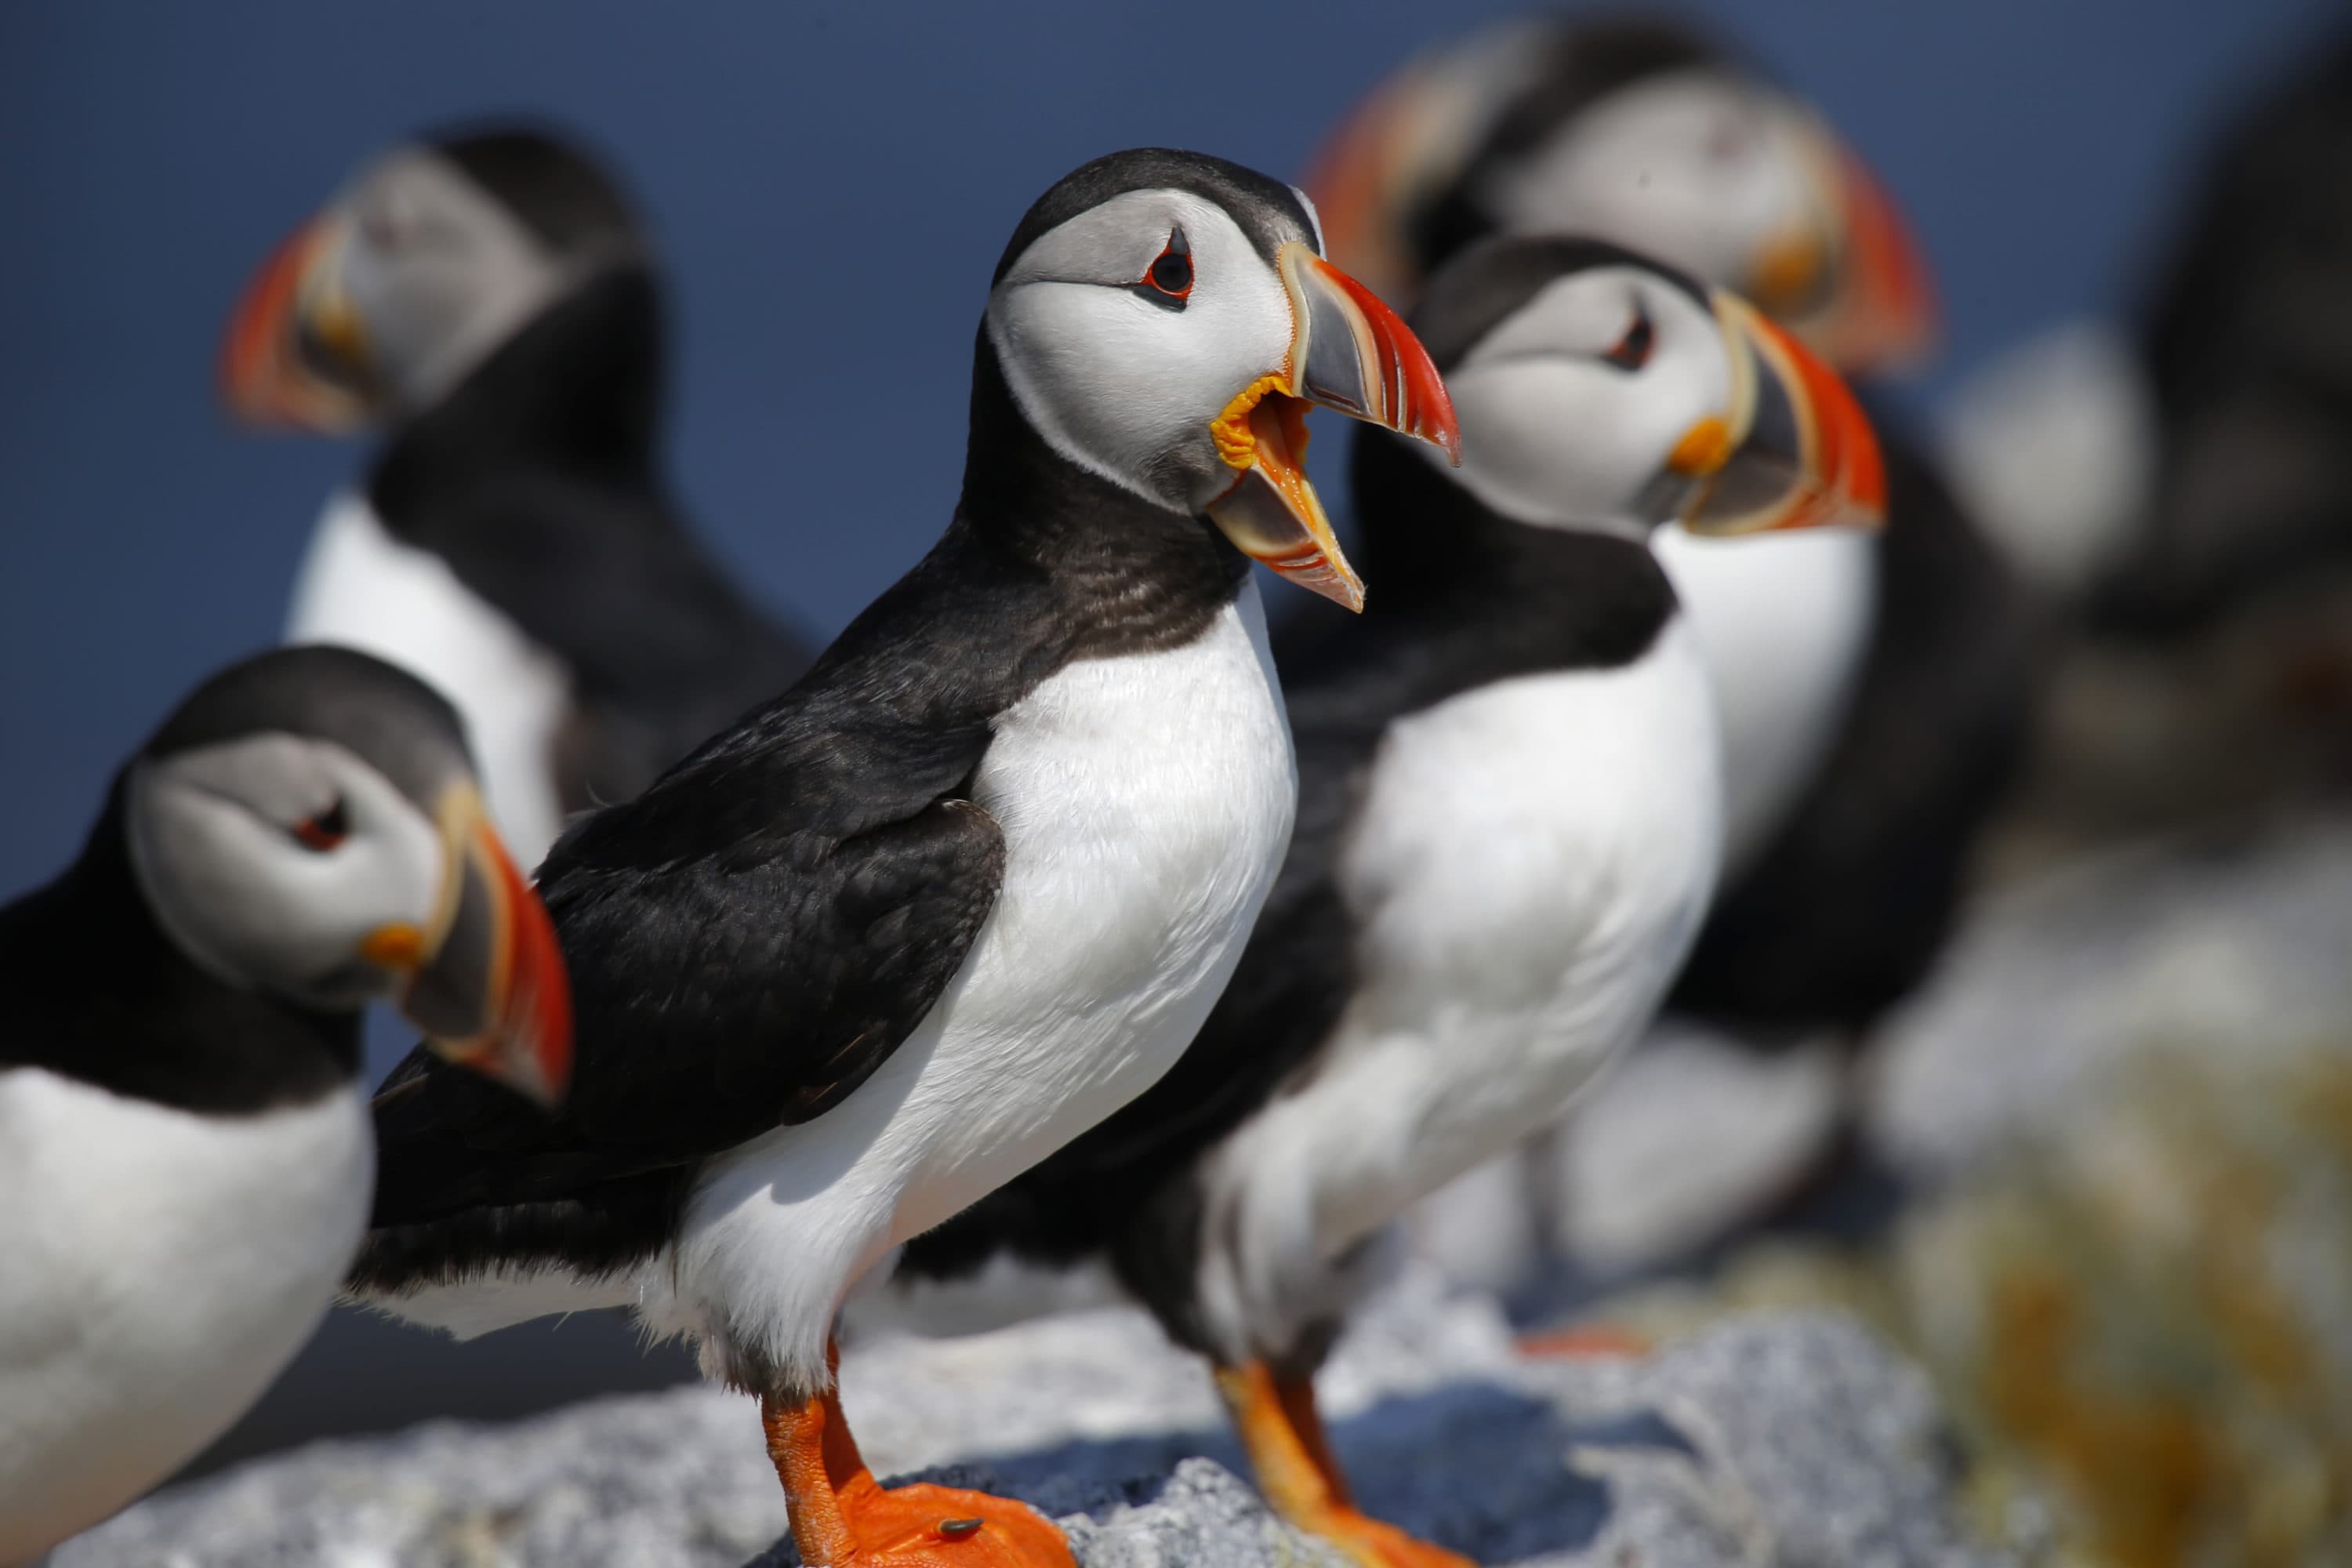 Atlantic puffins congregate on Eastern Egg Rock, a small island off the coast of Maine. Decades of conservation work have brought the state's population of the birds to about 1,300 pairs that nest on Maine islands. (Robert F. Bukaty/AP)